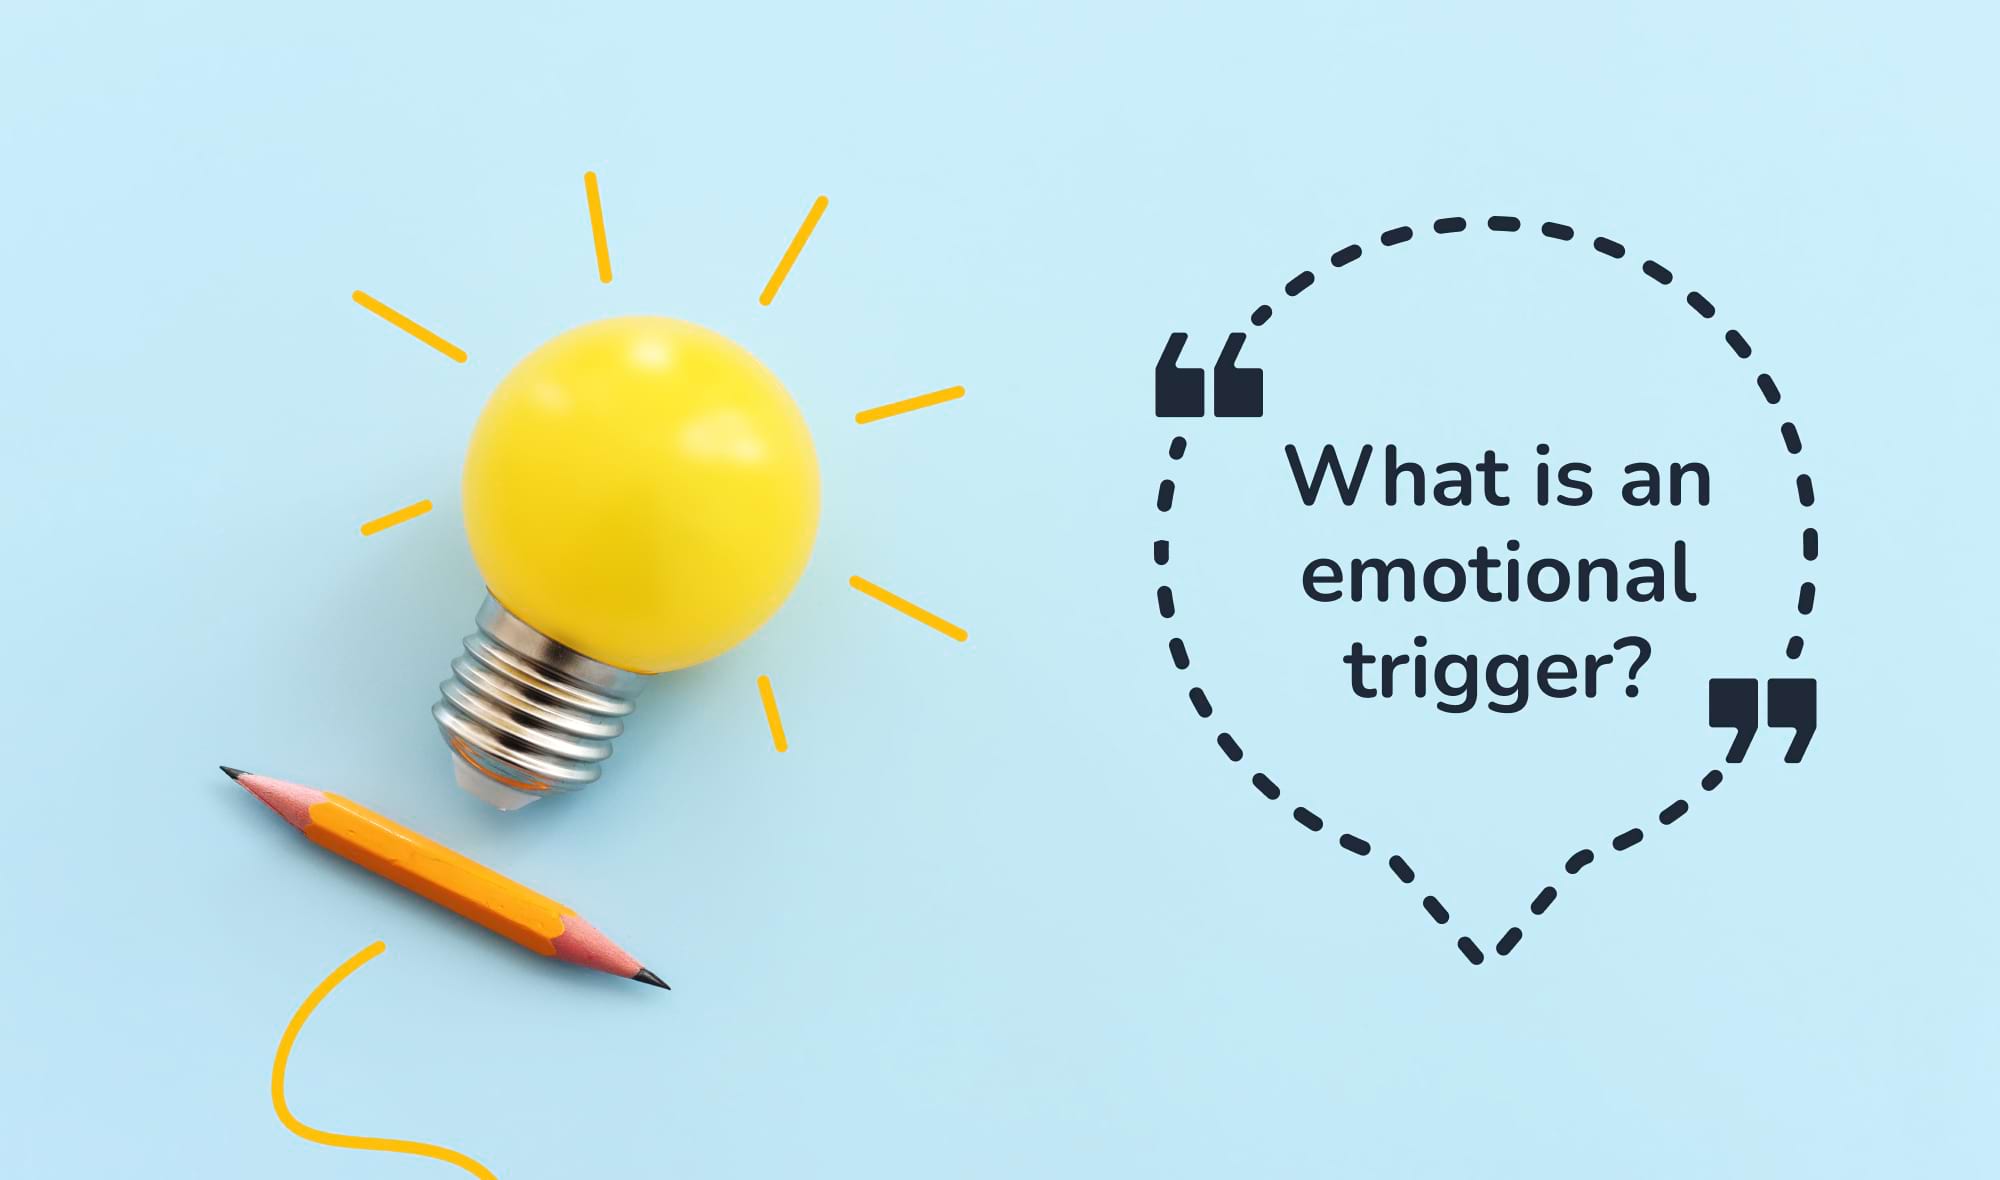 What is an emotional trigger?